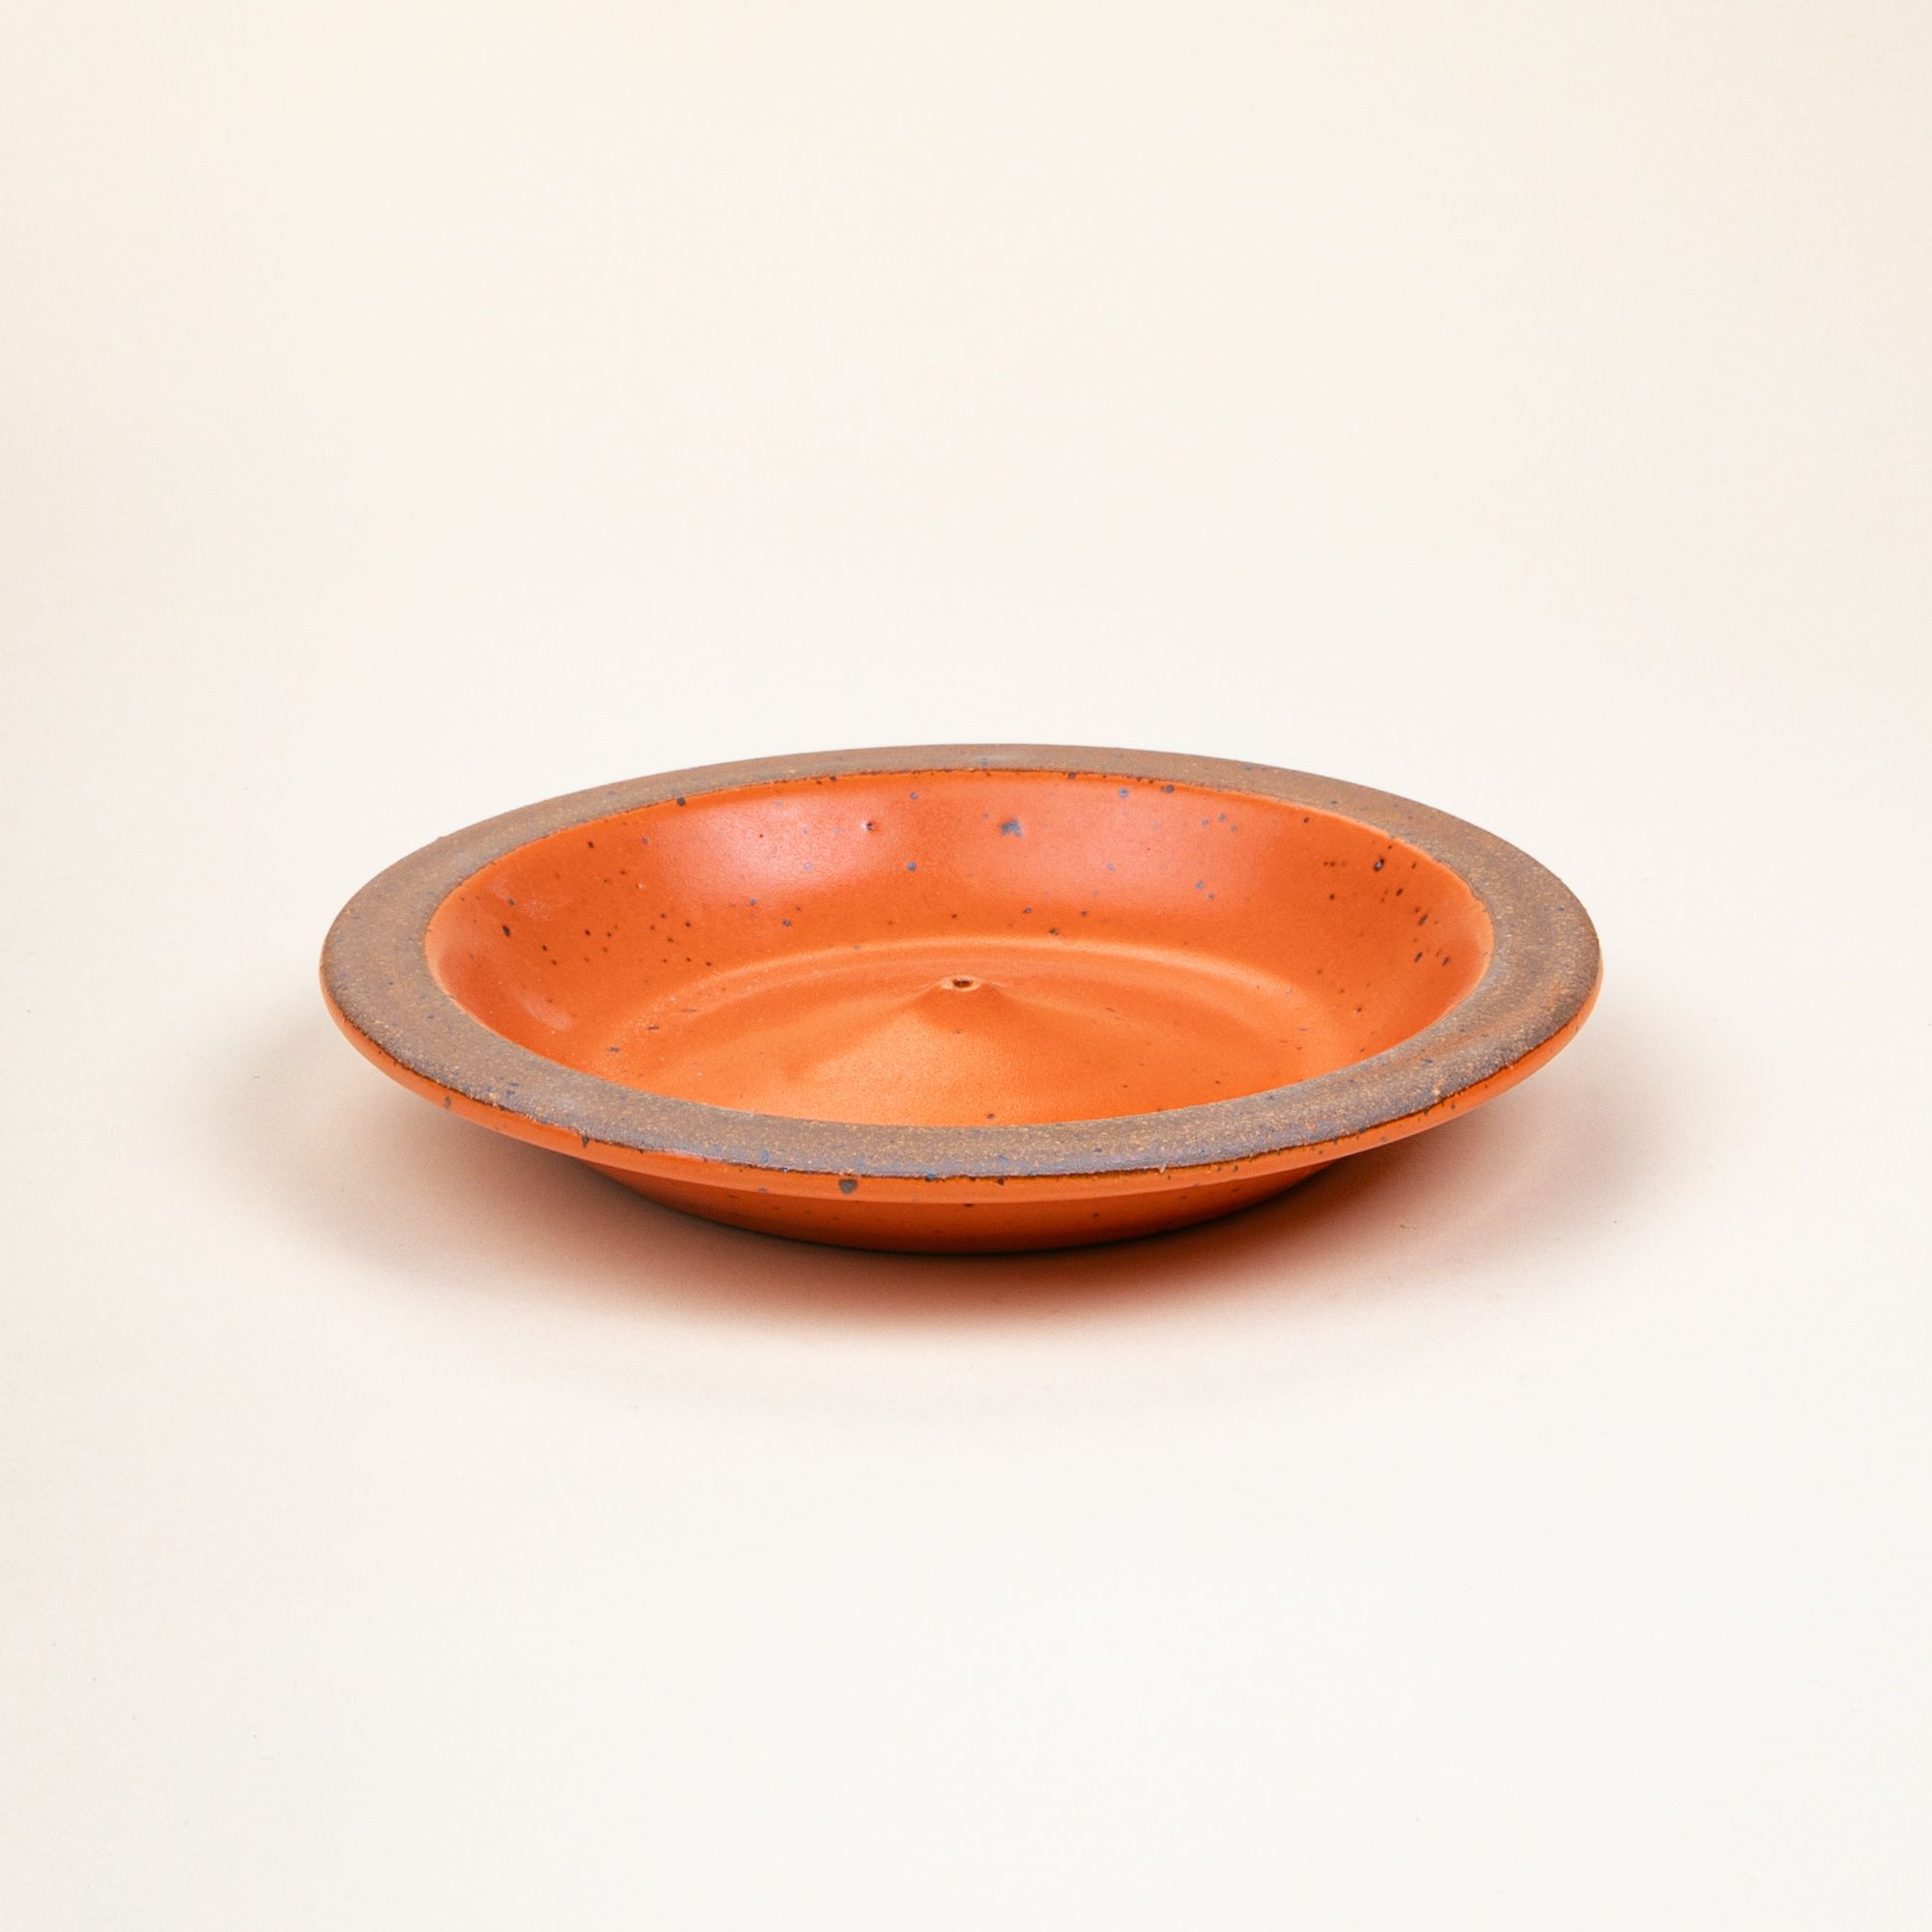 A ceramic plate-shaped incense stick holder with an unglazed rim and glazed in a bold orange color featuring lots of iron speckles.